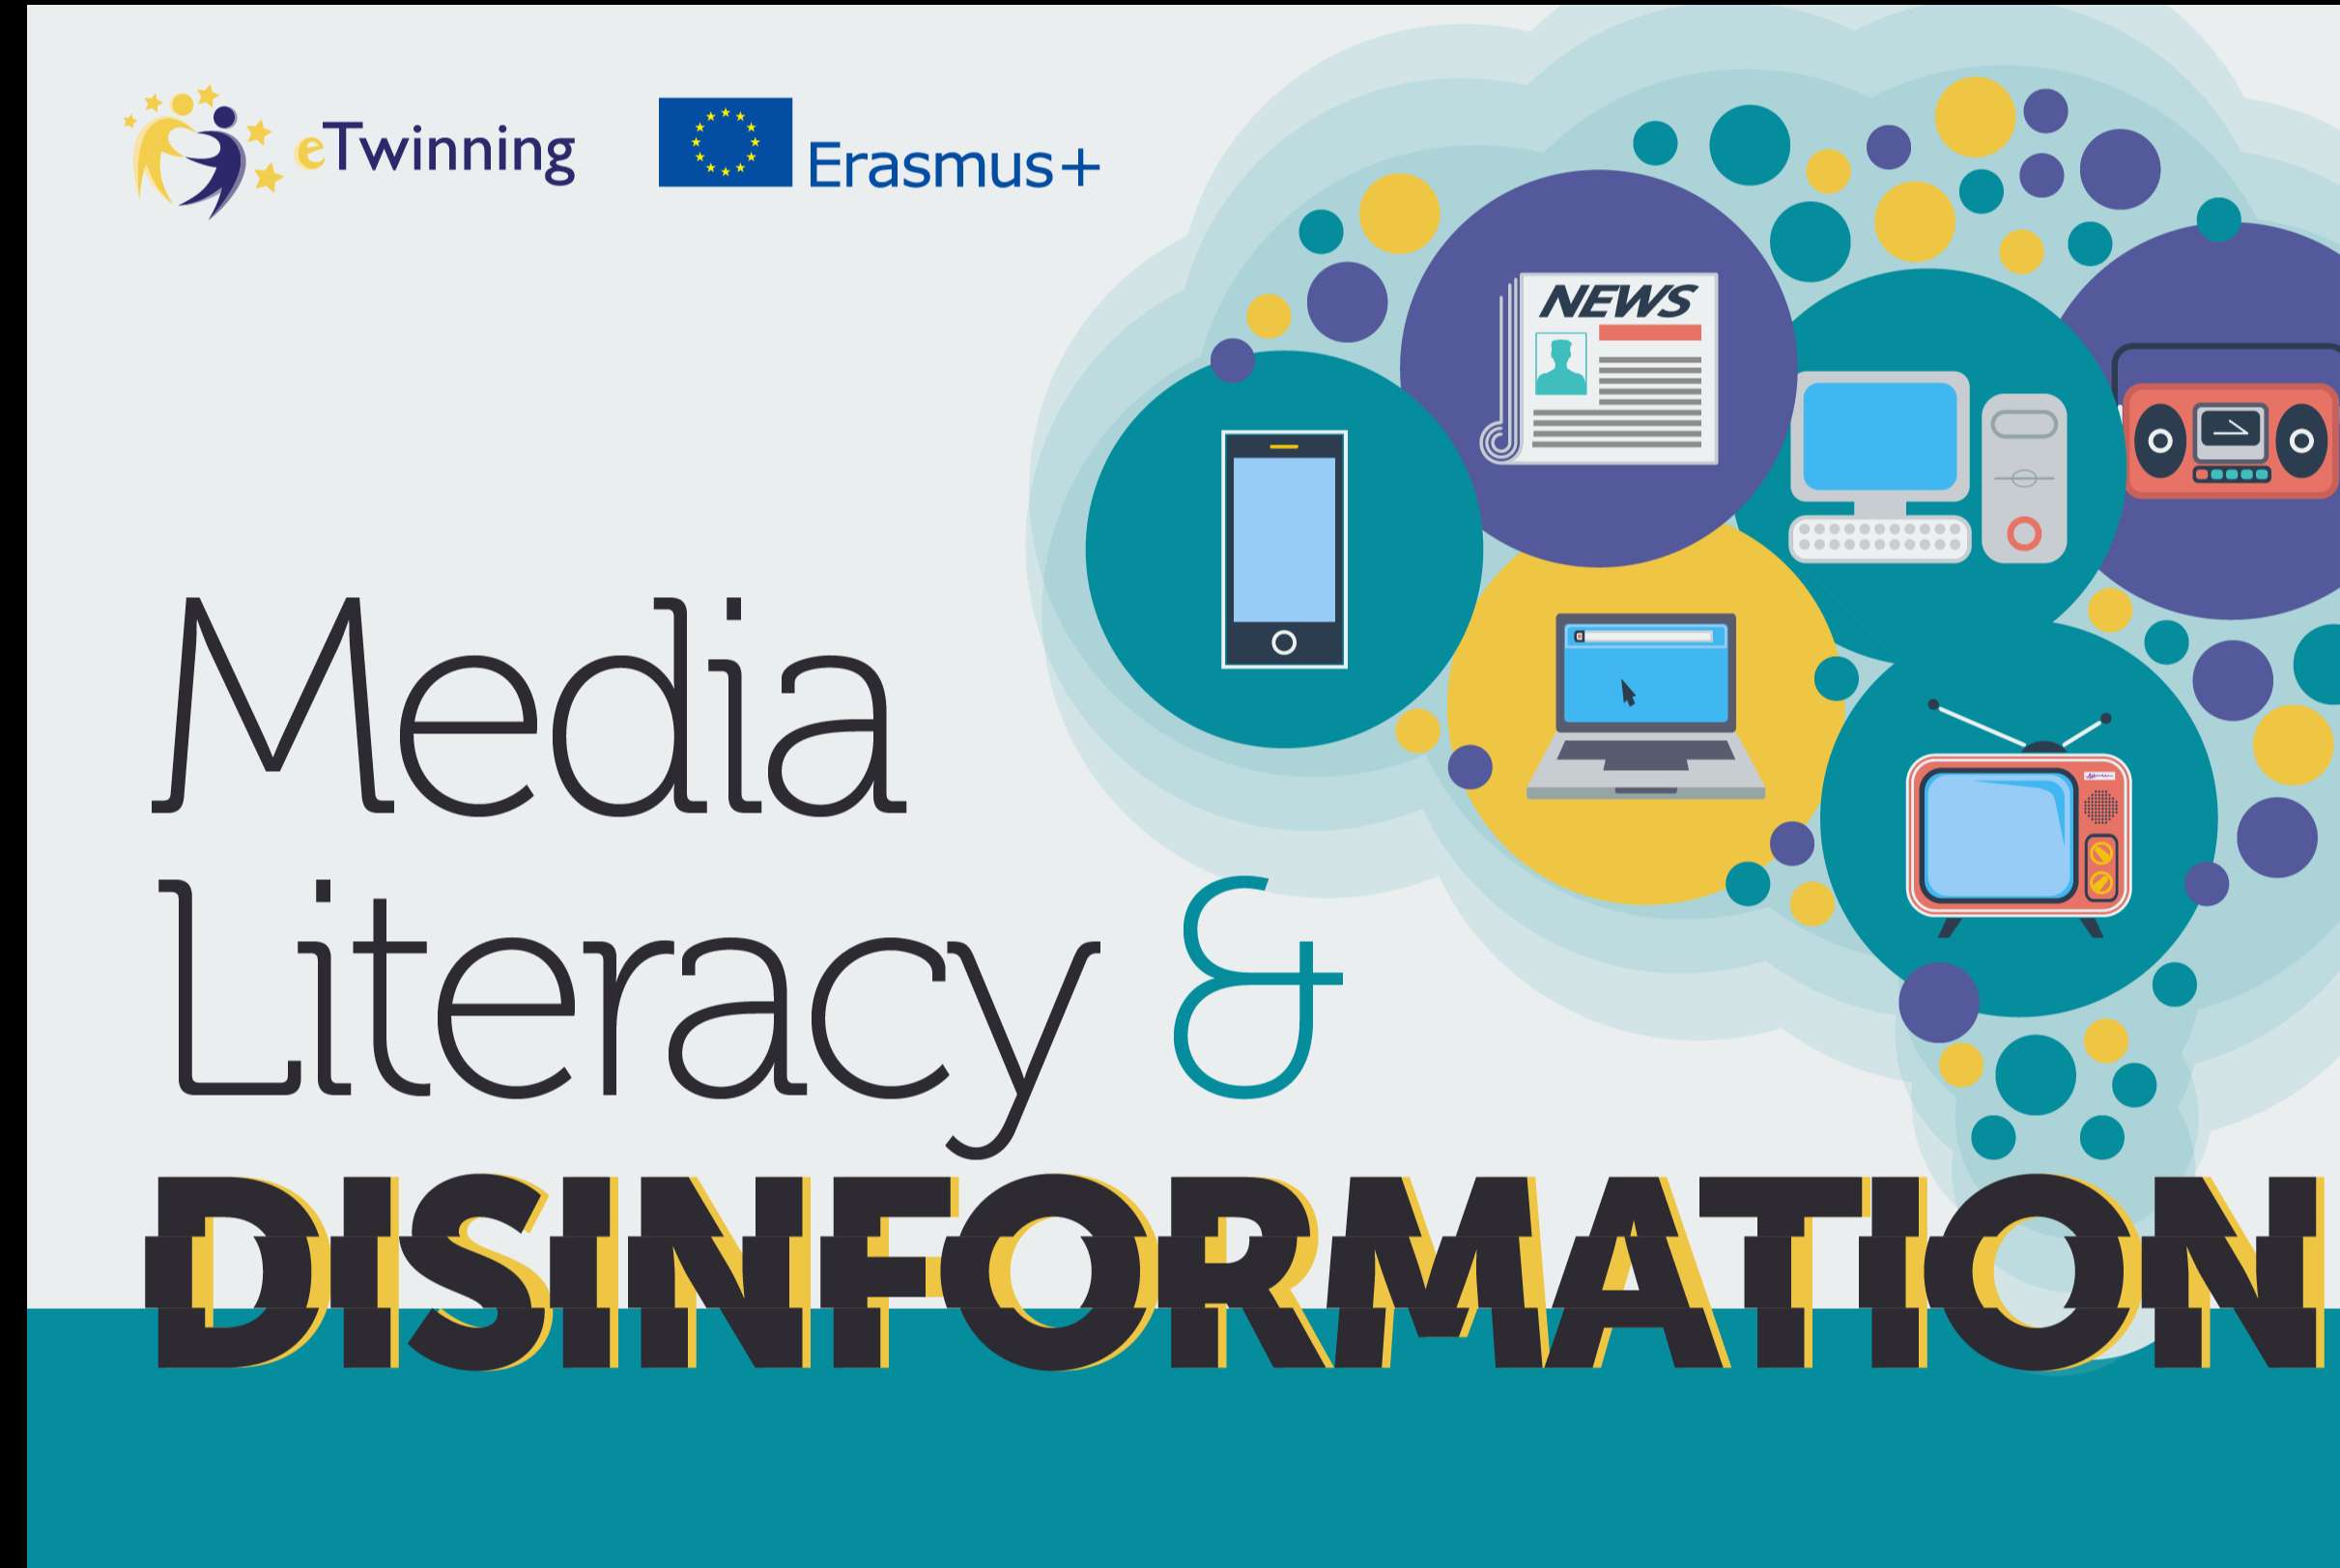 eTwinning "Media Literacy and Disinformation" group